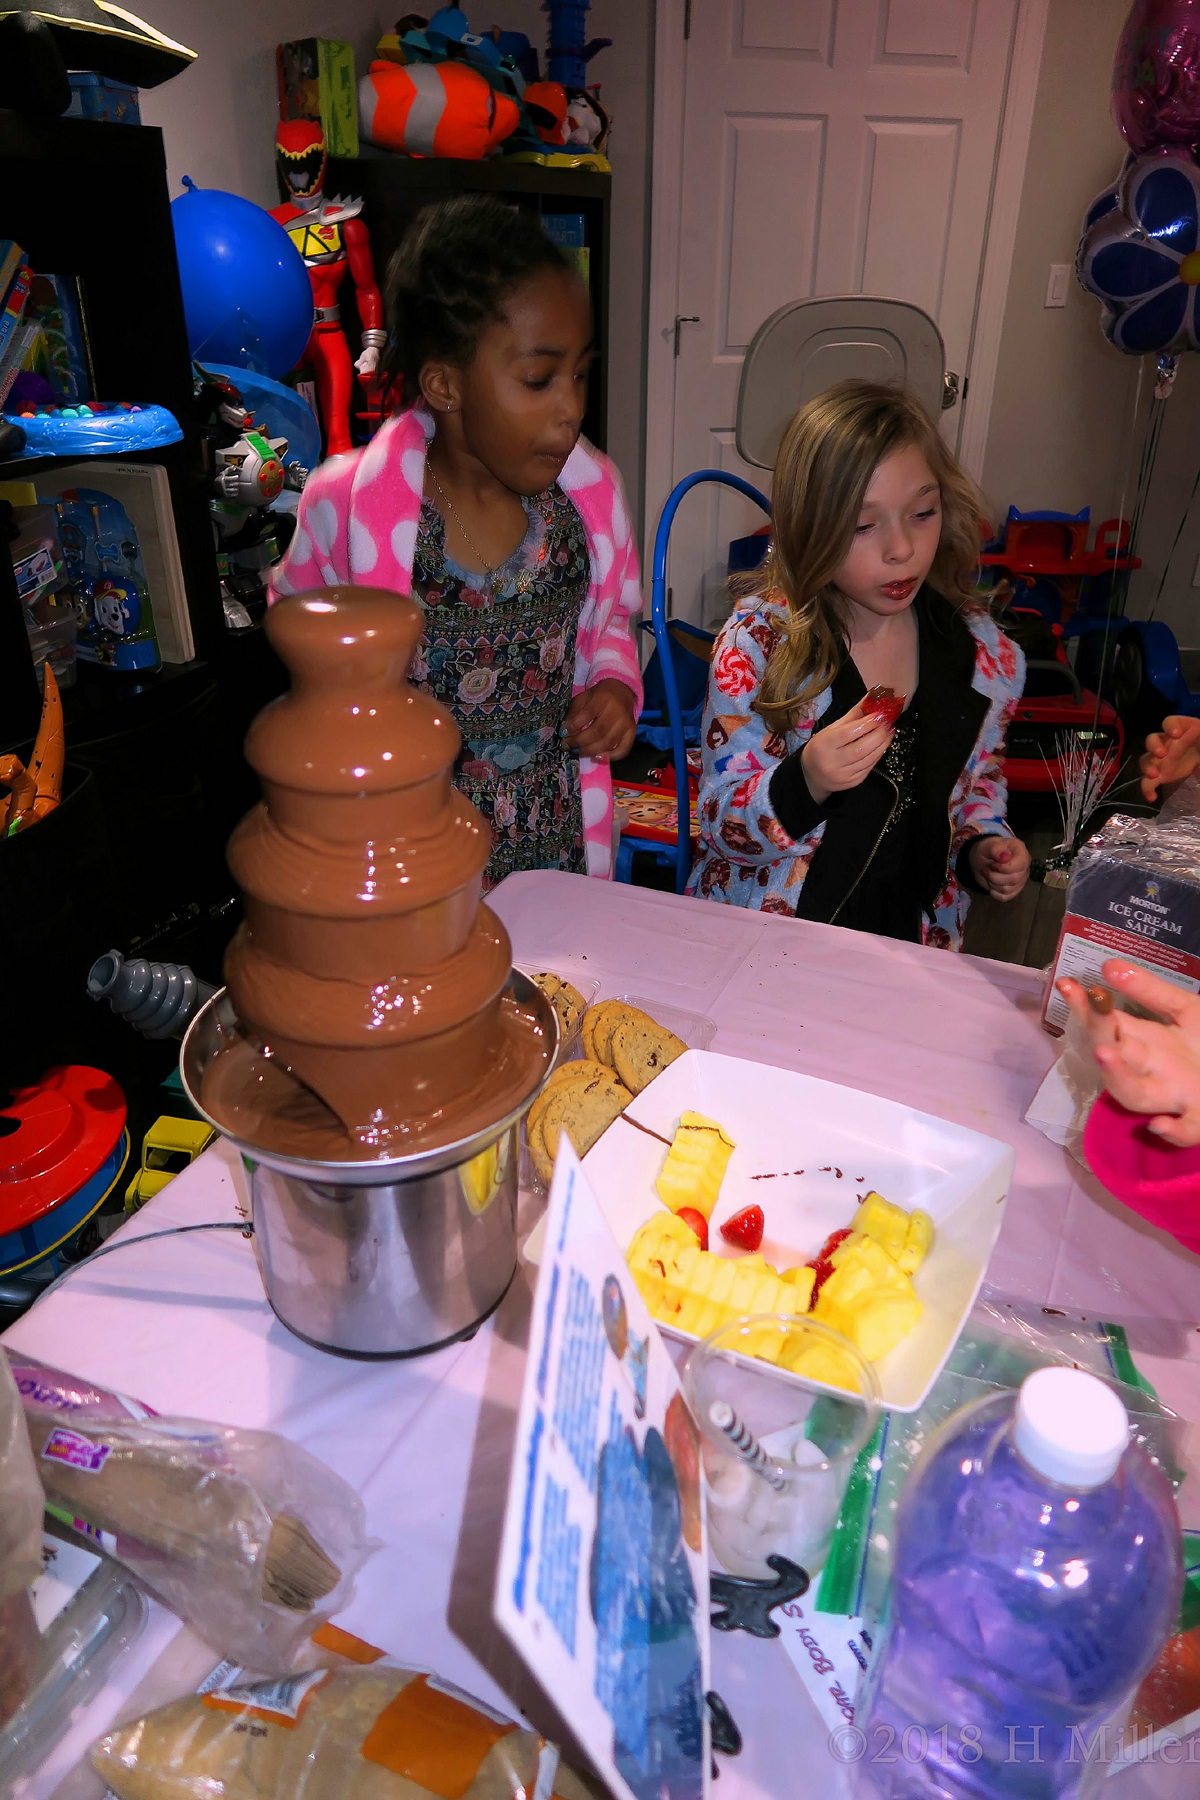 The Best Combination Is Strawberries And Chocolate! Dipping Fruit In The Chocolate Fountain! 